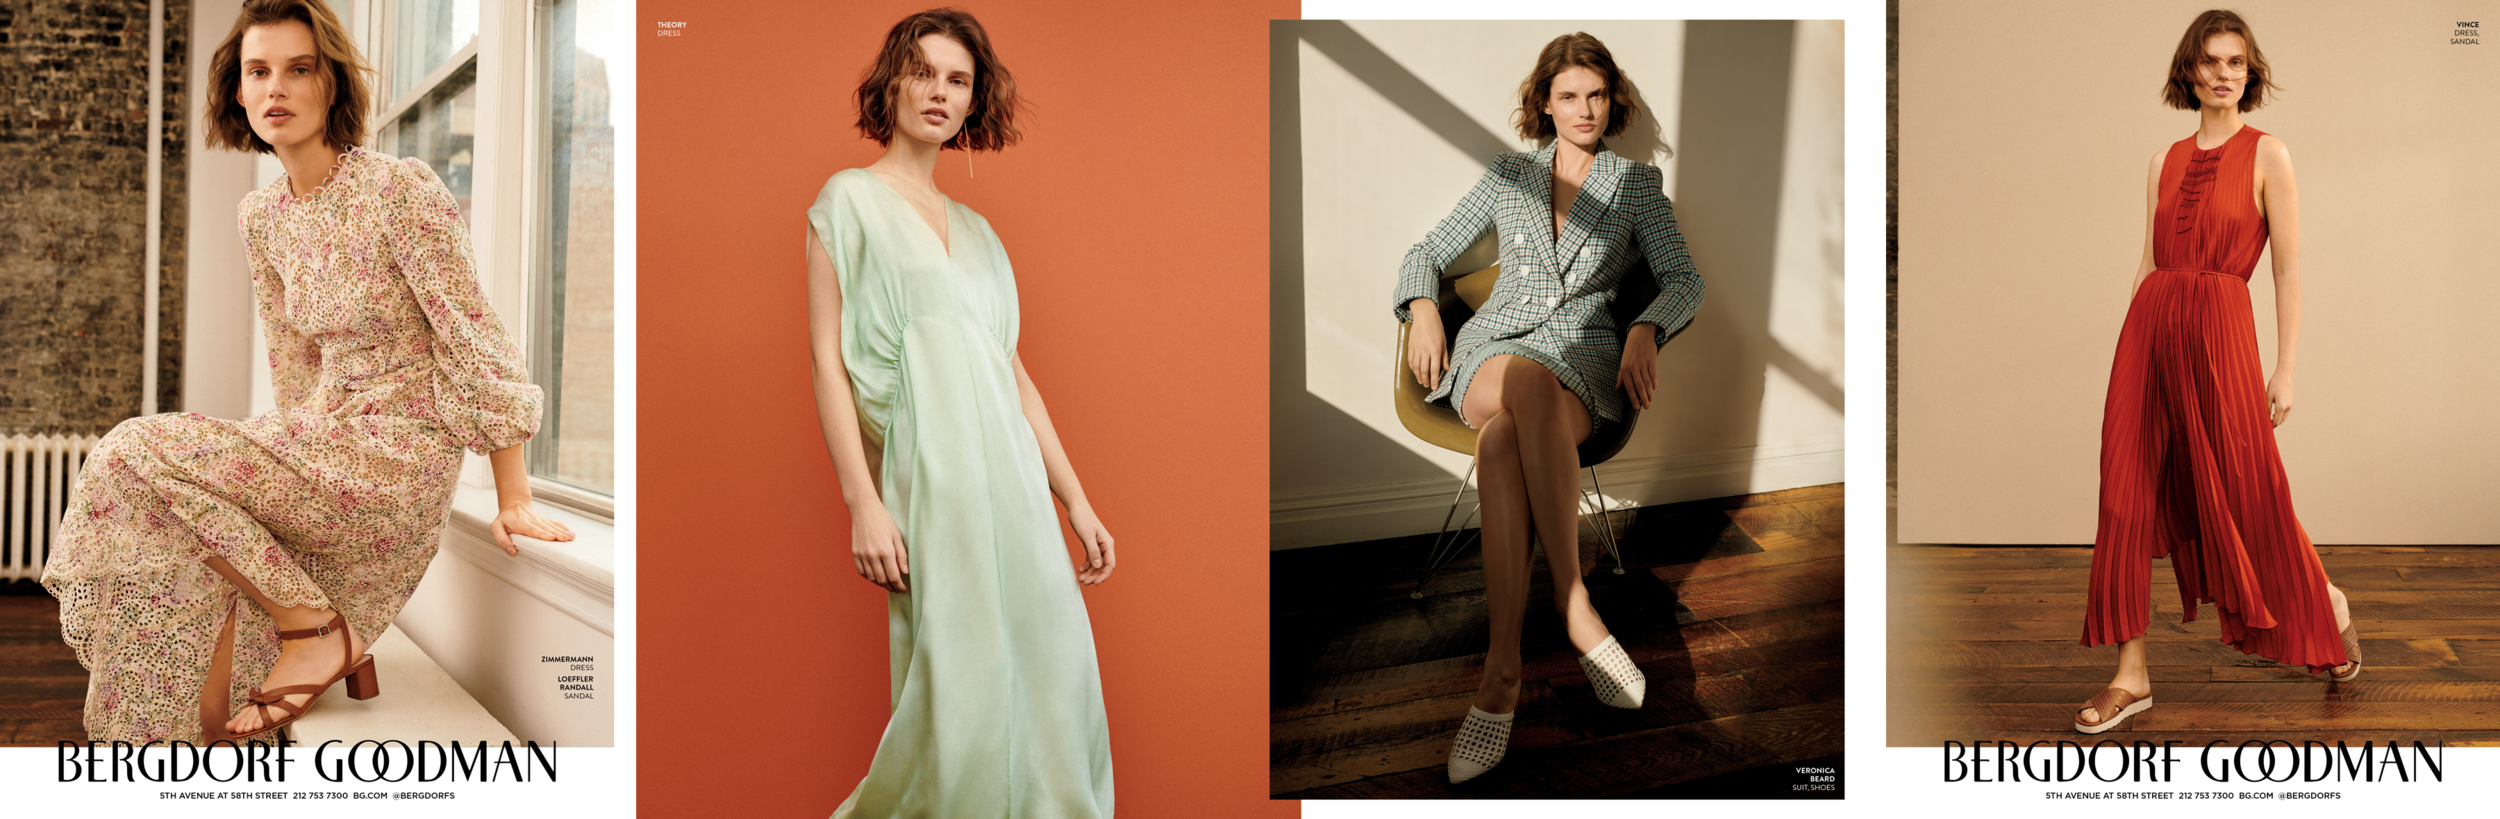  5F campaign advertisement for  New York ’s Spring Fashion Issue. 4pg insert. Design and On-Set Art Direction. Consulting Creative Director Ashley Sargent Price, Photographer Alexandra Nataf, Fashion Stylist Deborah Watson. 